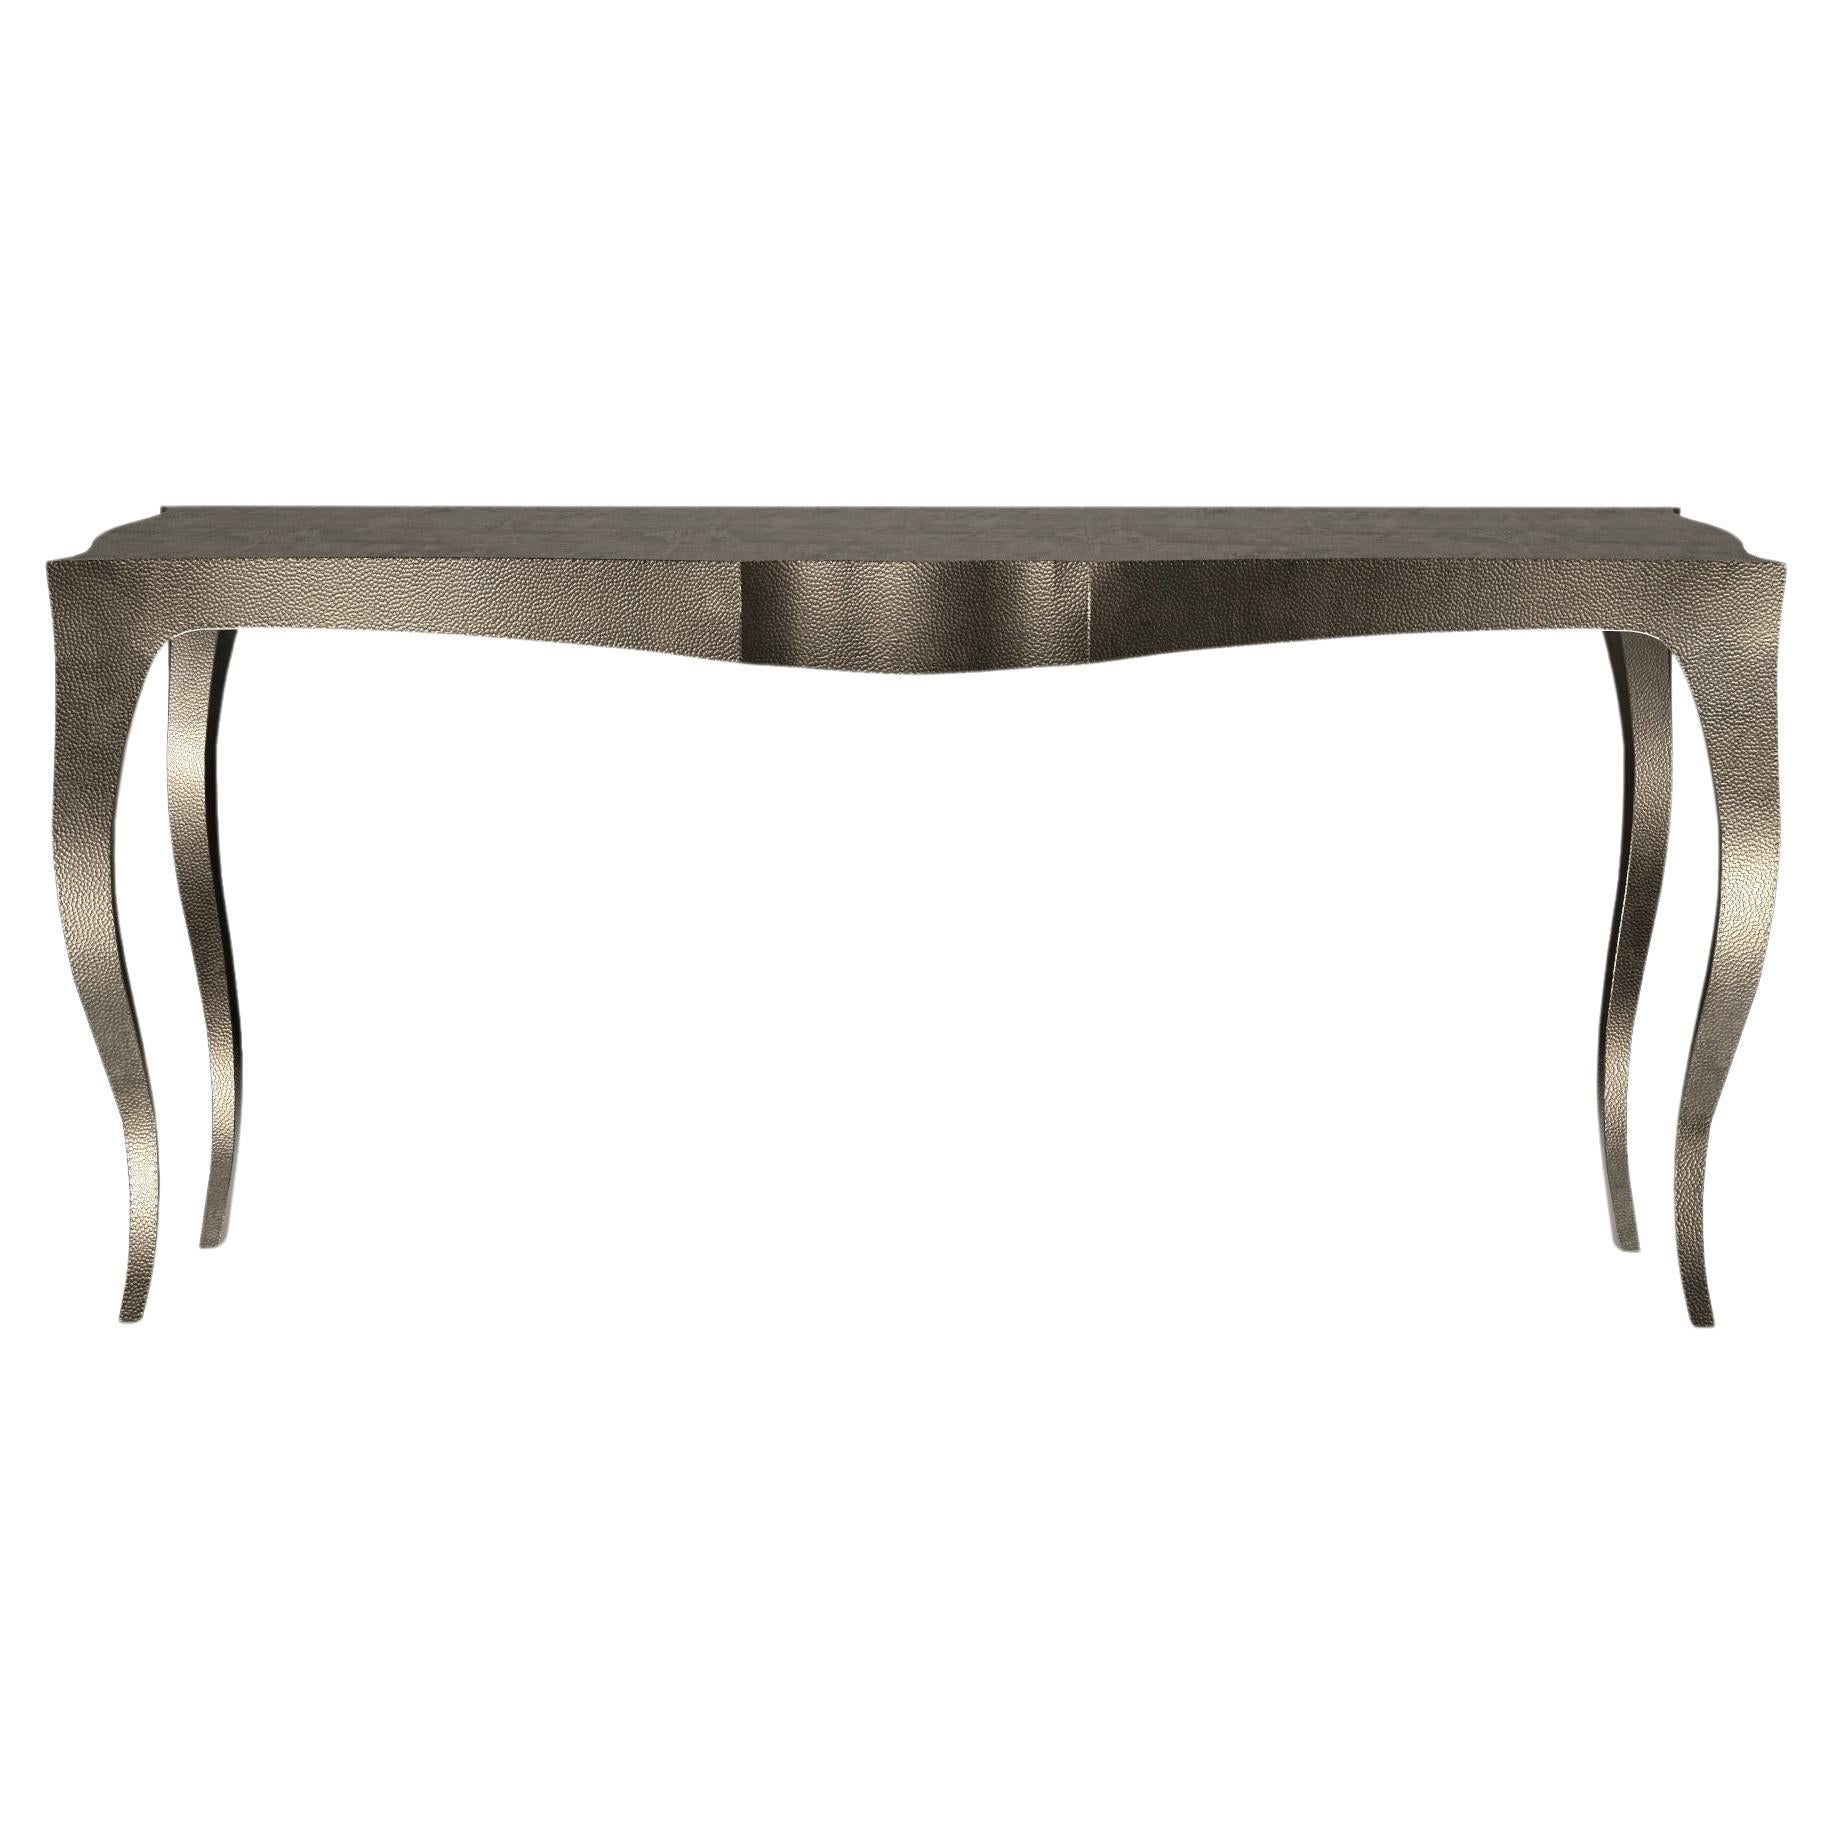 Louise Console Art Deco Center Tables Mid. Hammered Antique Bronze